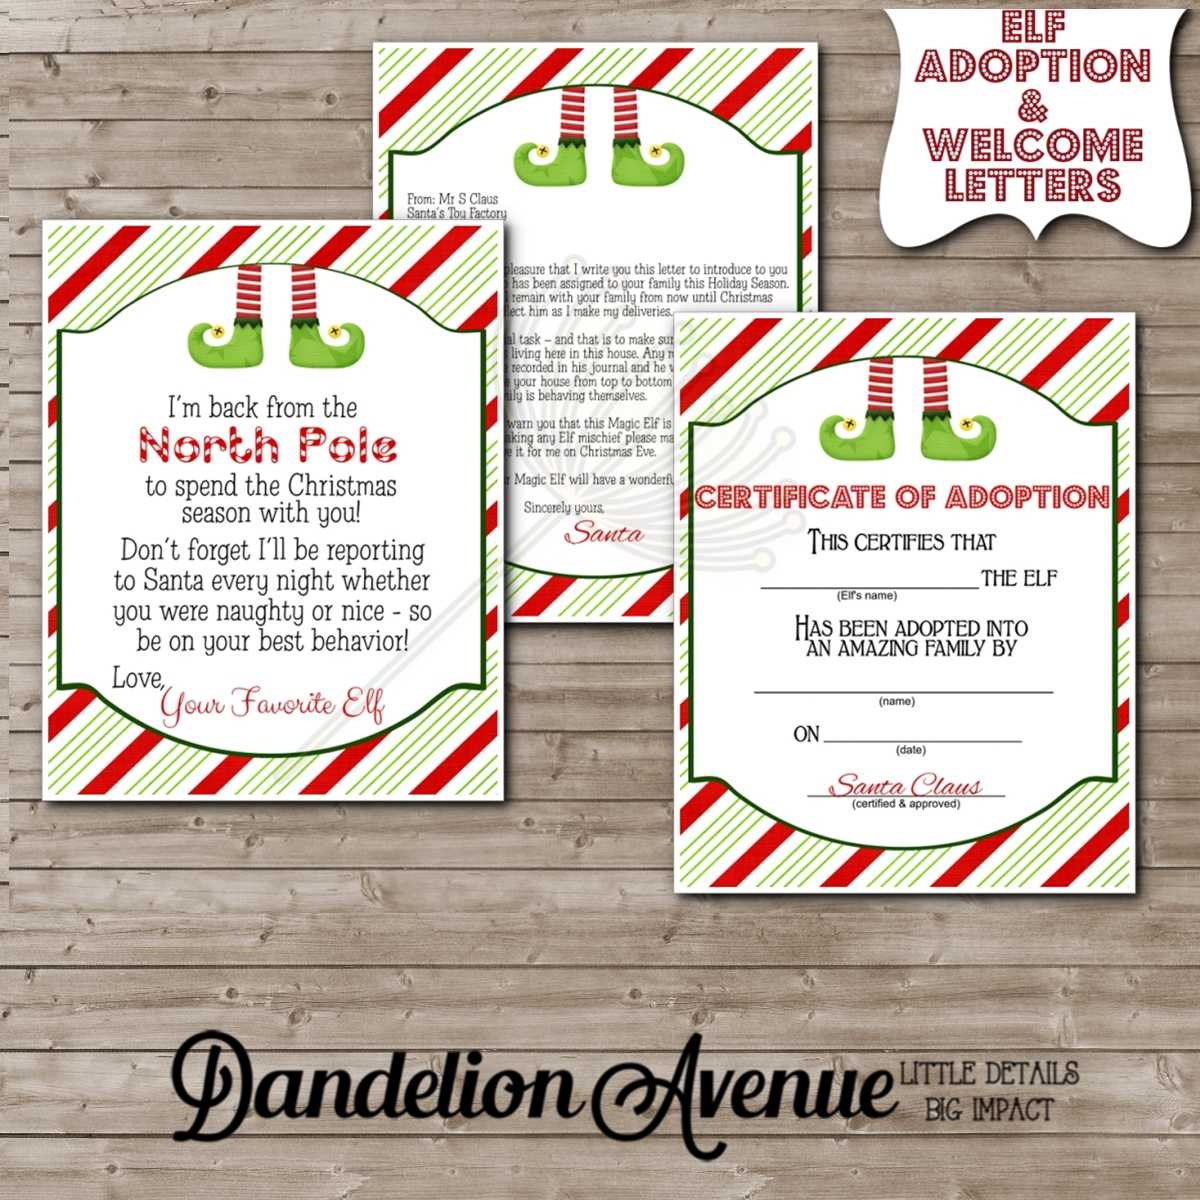 Magic Little Shelf Elf Welcome Letter & Adoption Certificate With Regard To Toy Adoption Certificate Template